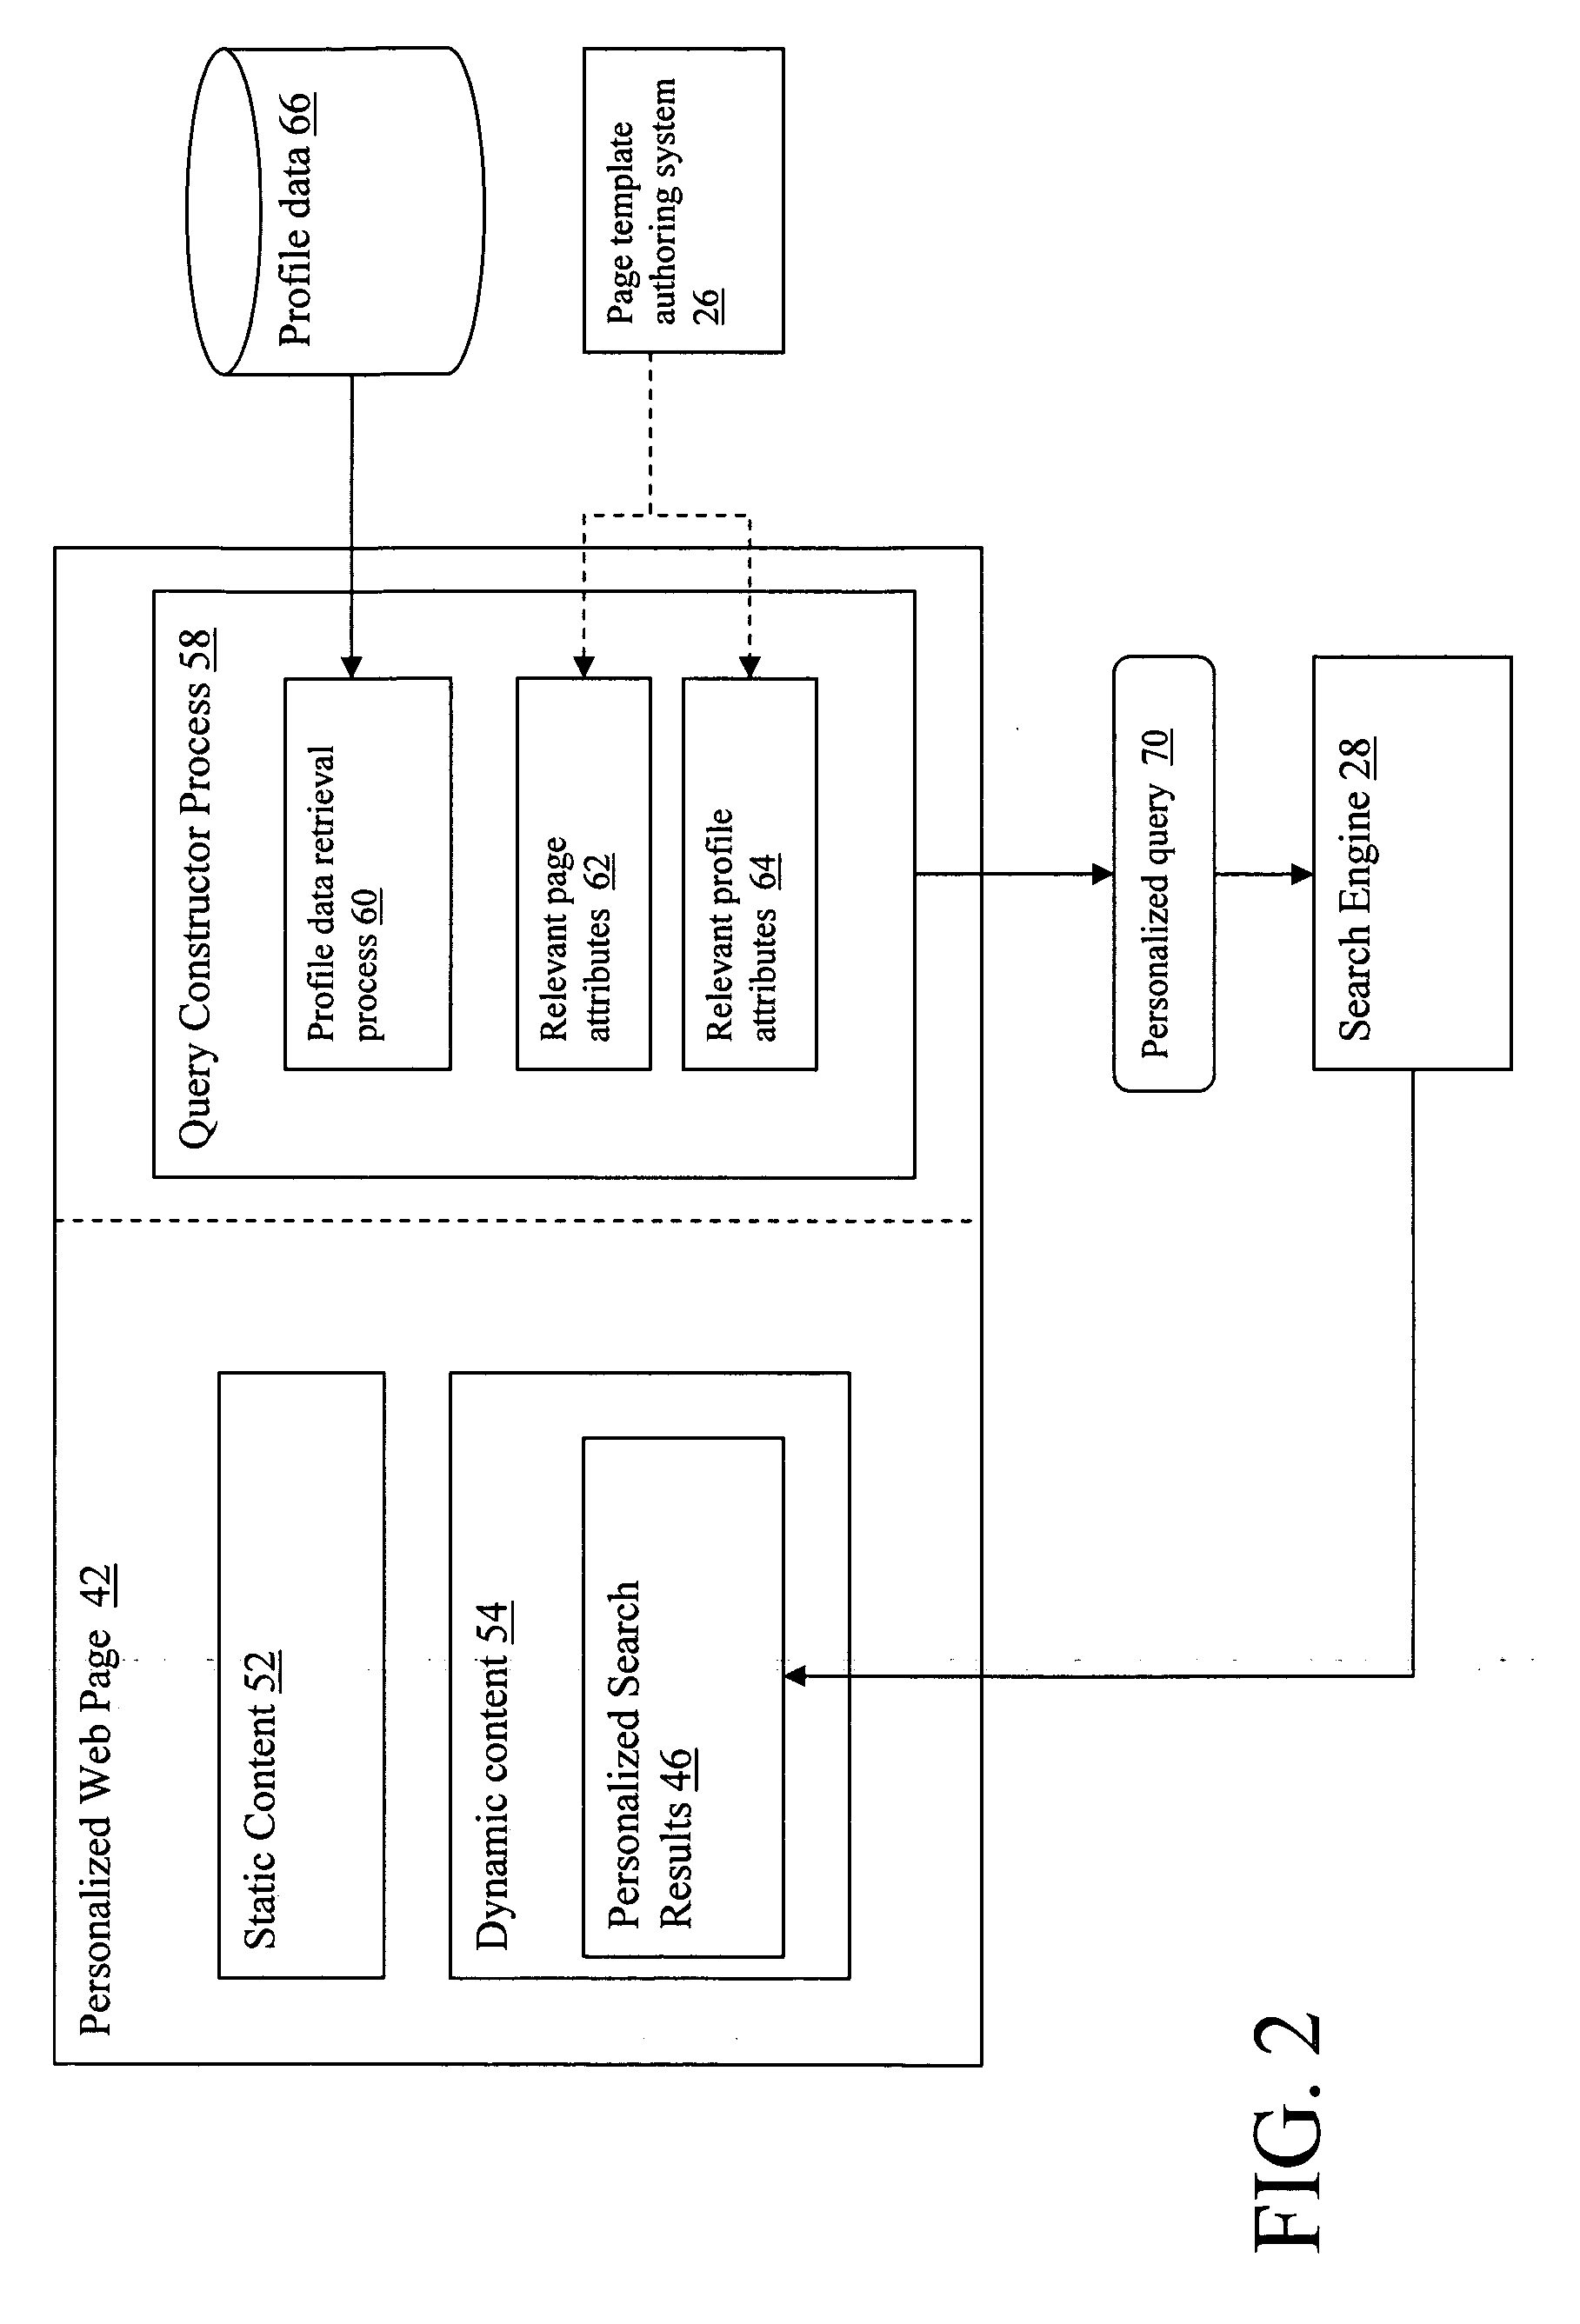 System and method for generating personalized web pages